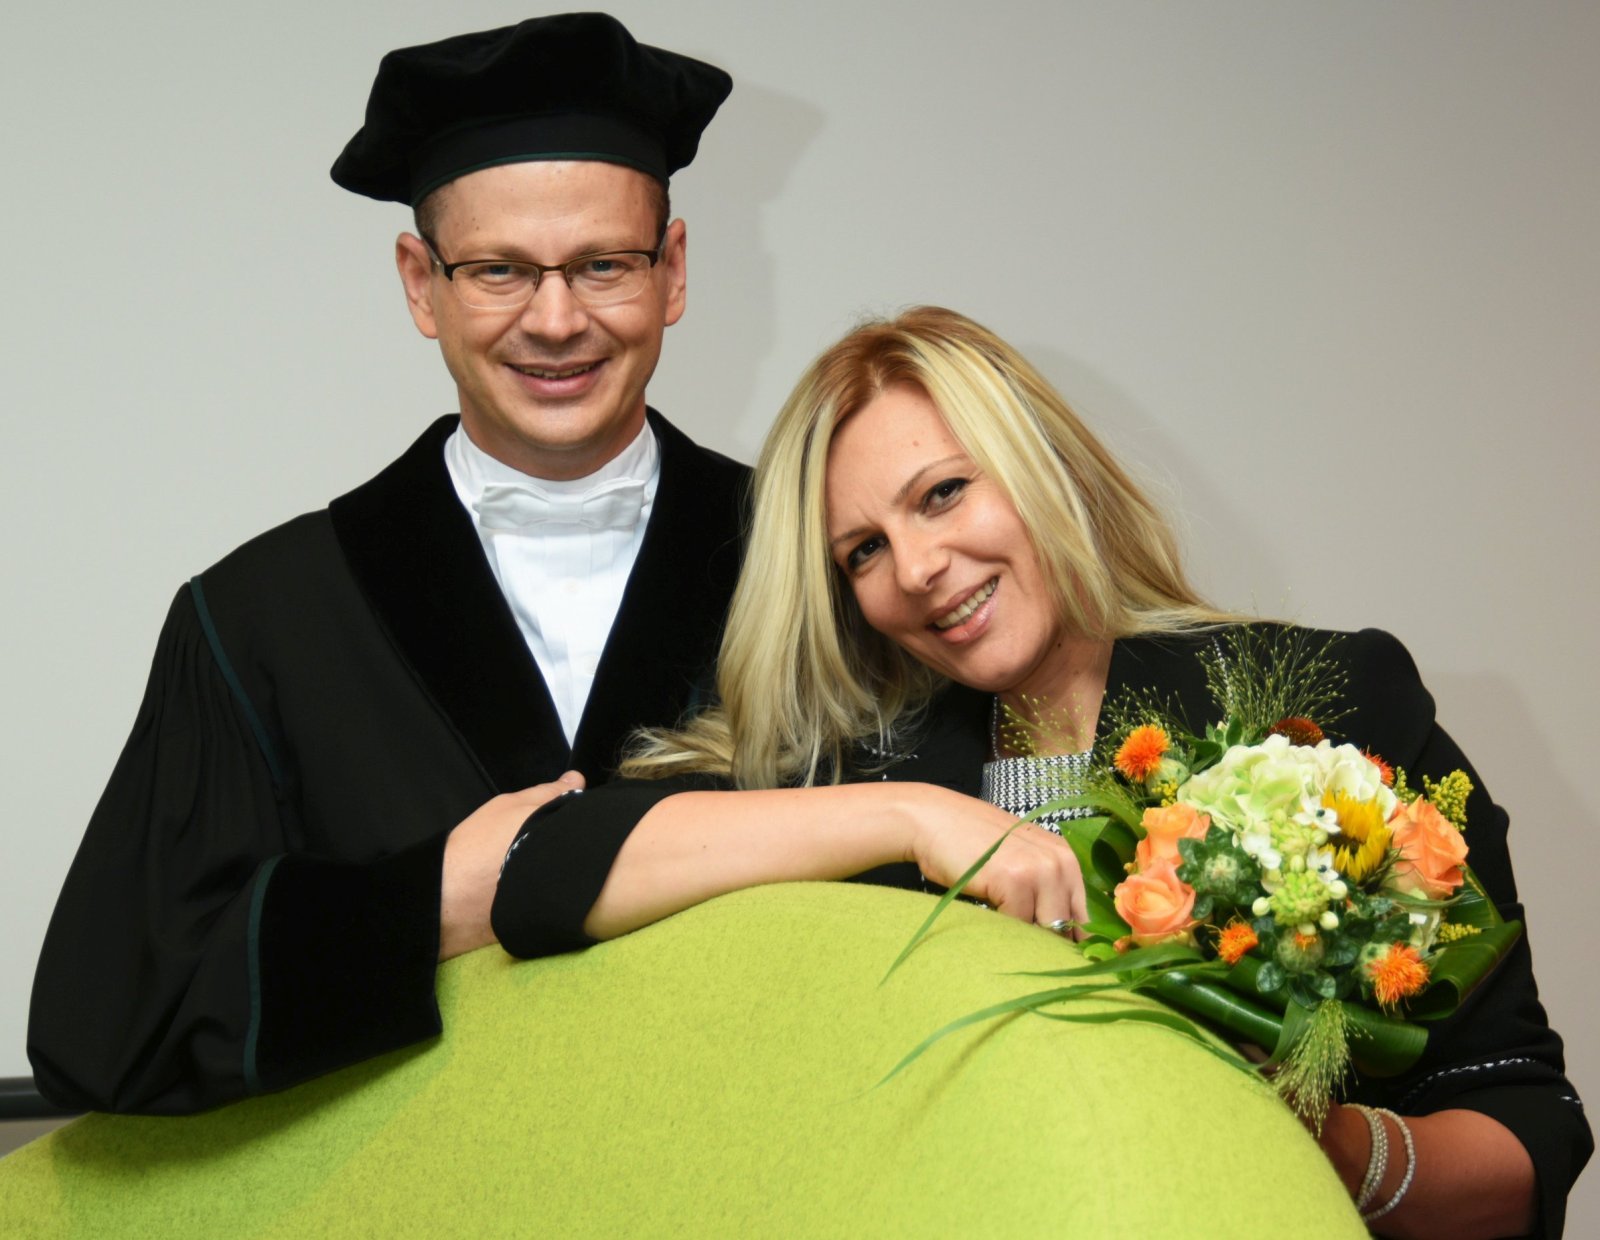 Photo X - At the inaugural lecture as (industrial) full professor at Unversity of Twente (NL)